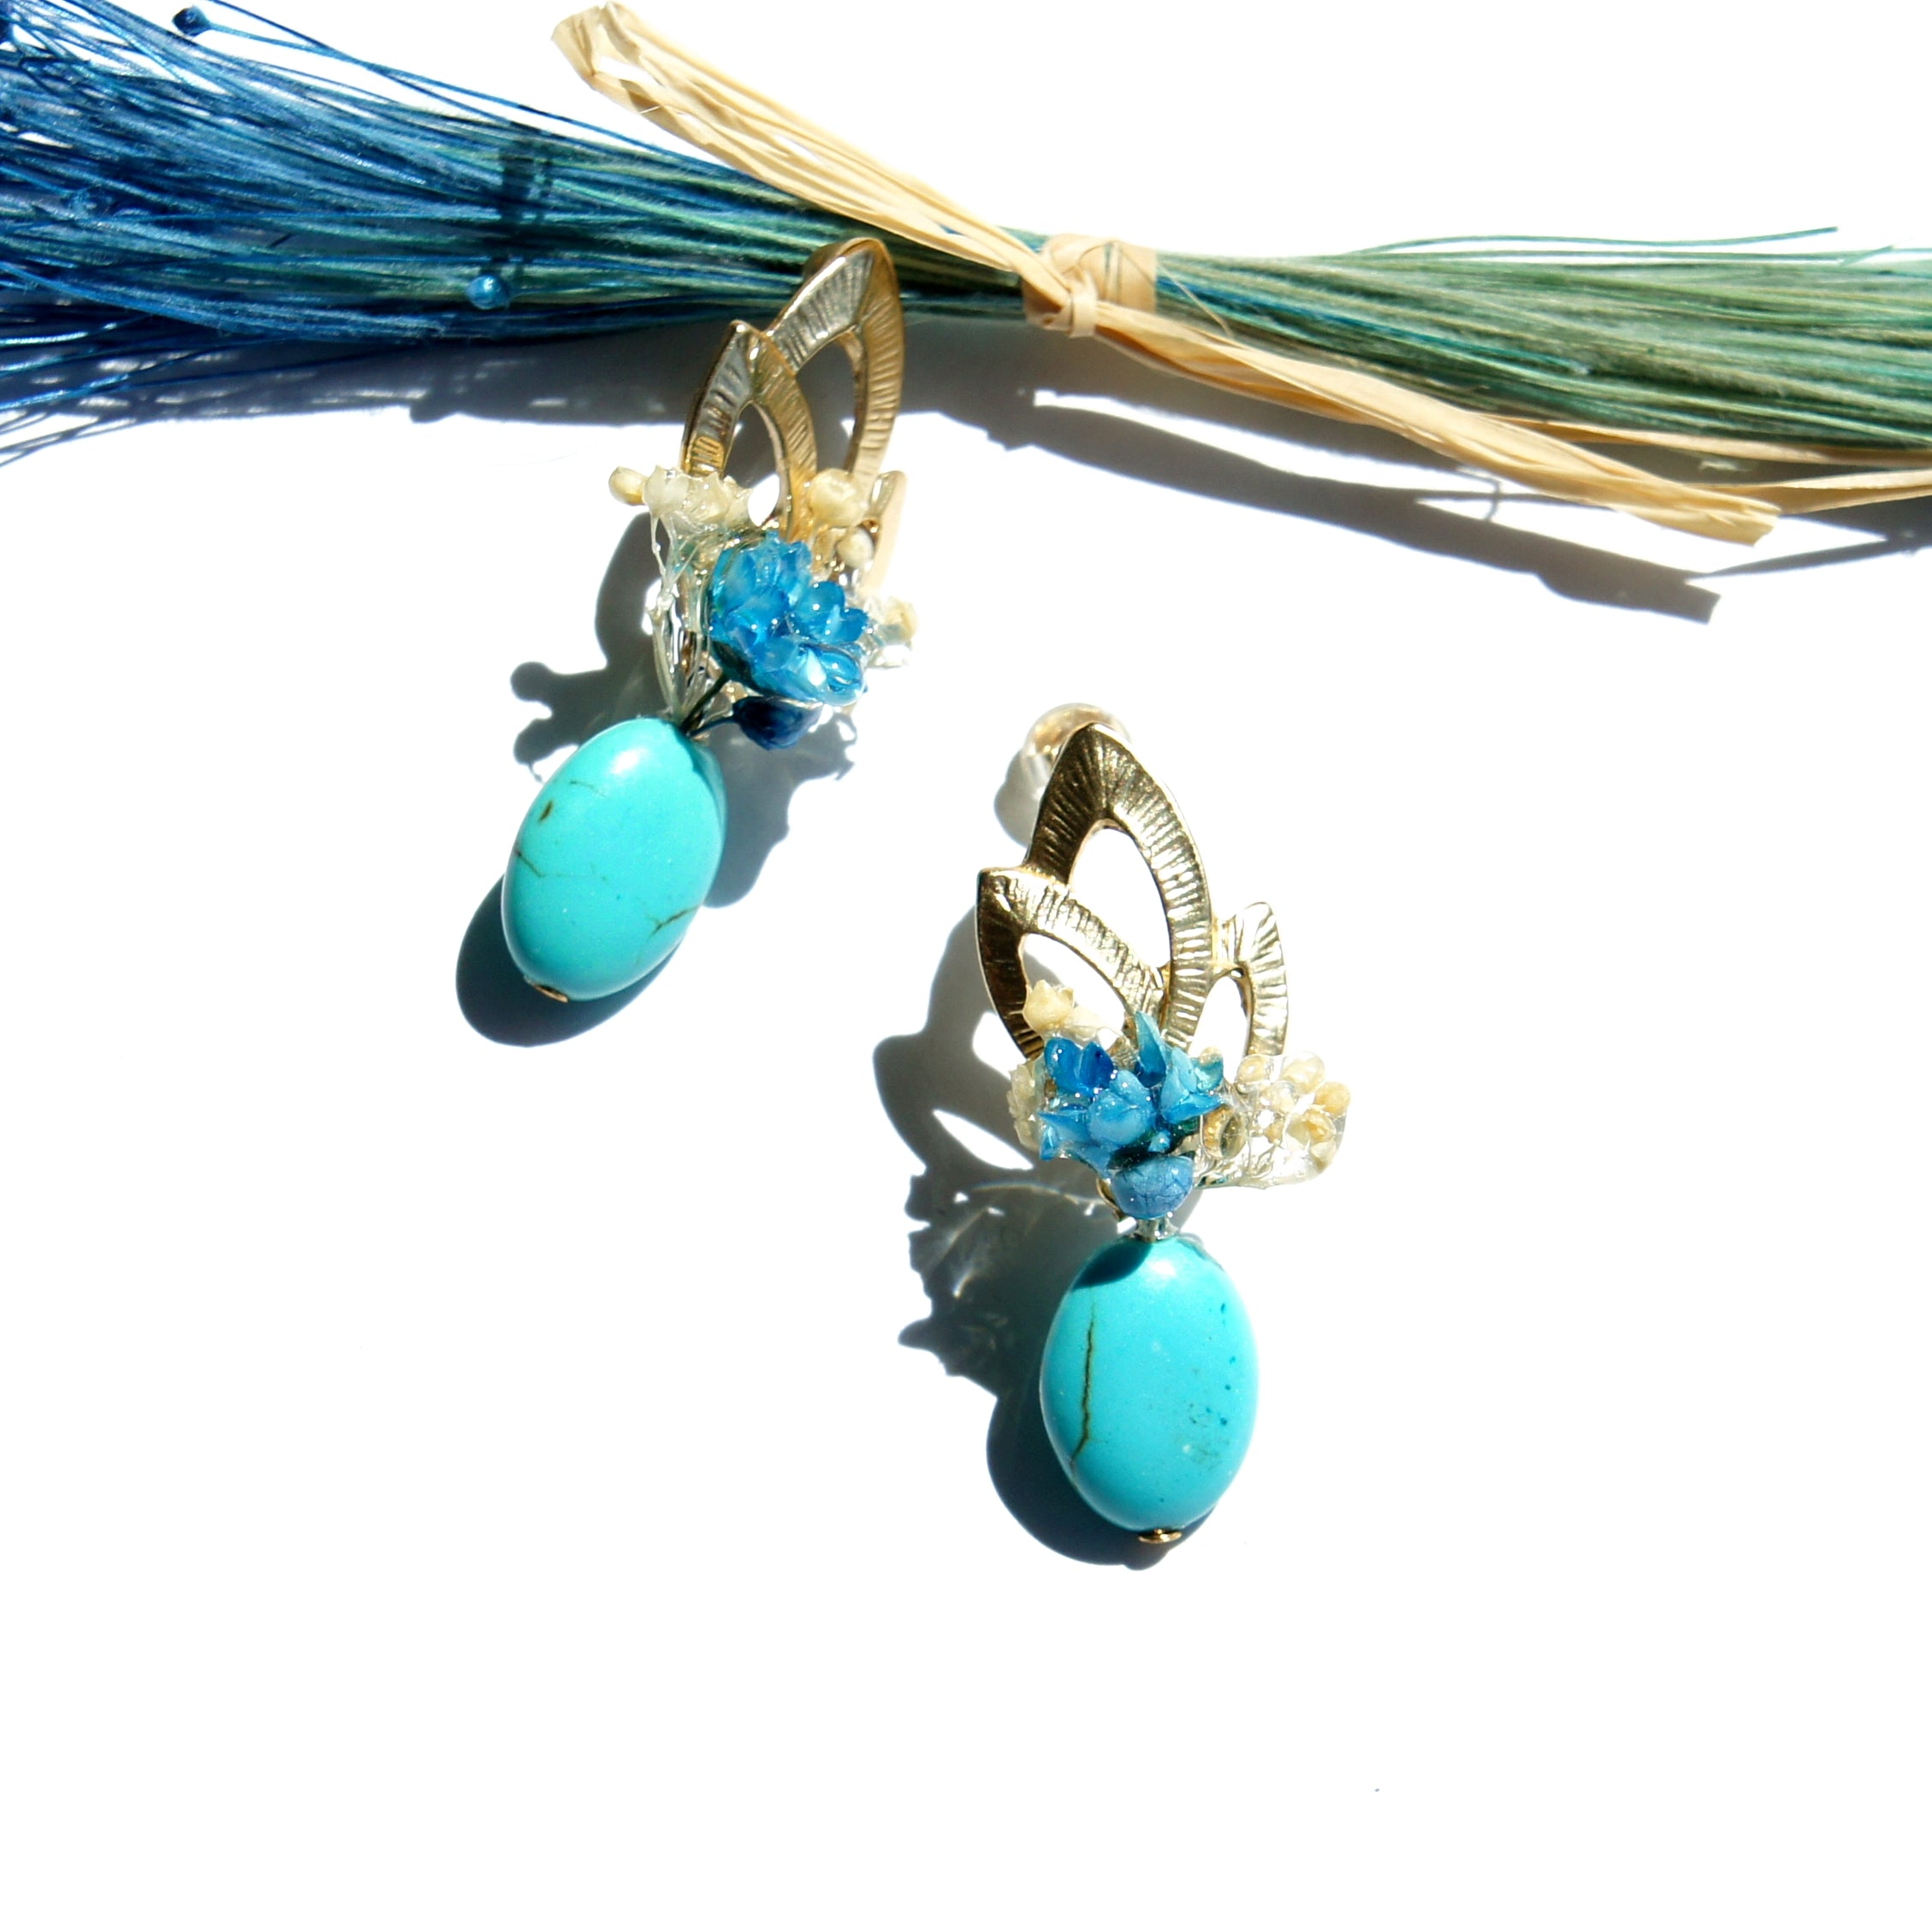 Monticelli Flowers in a Vase Turquoise Earrings